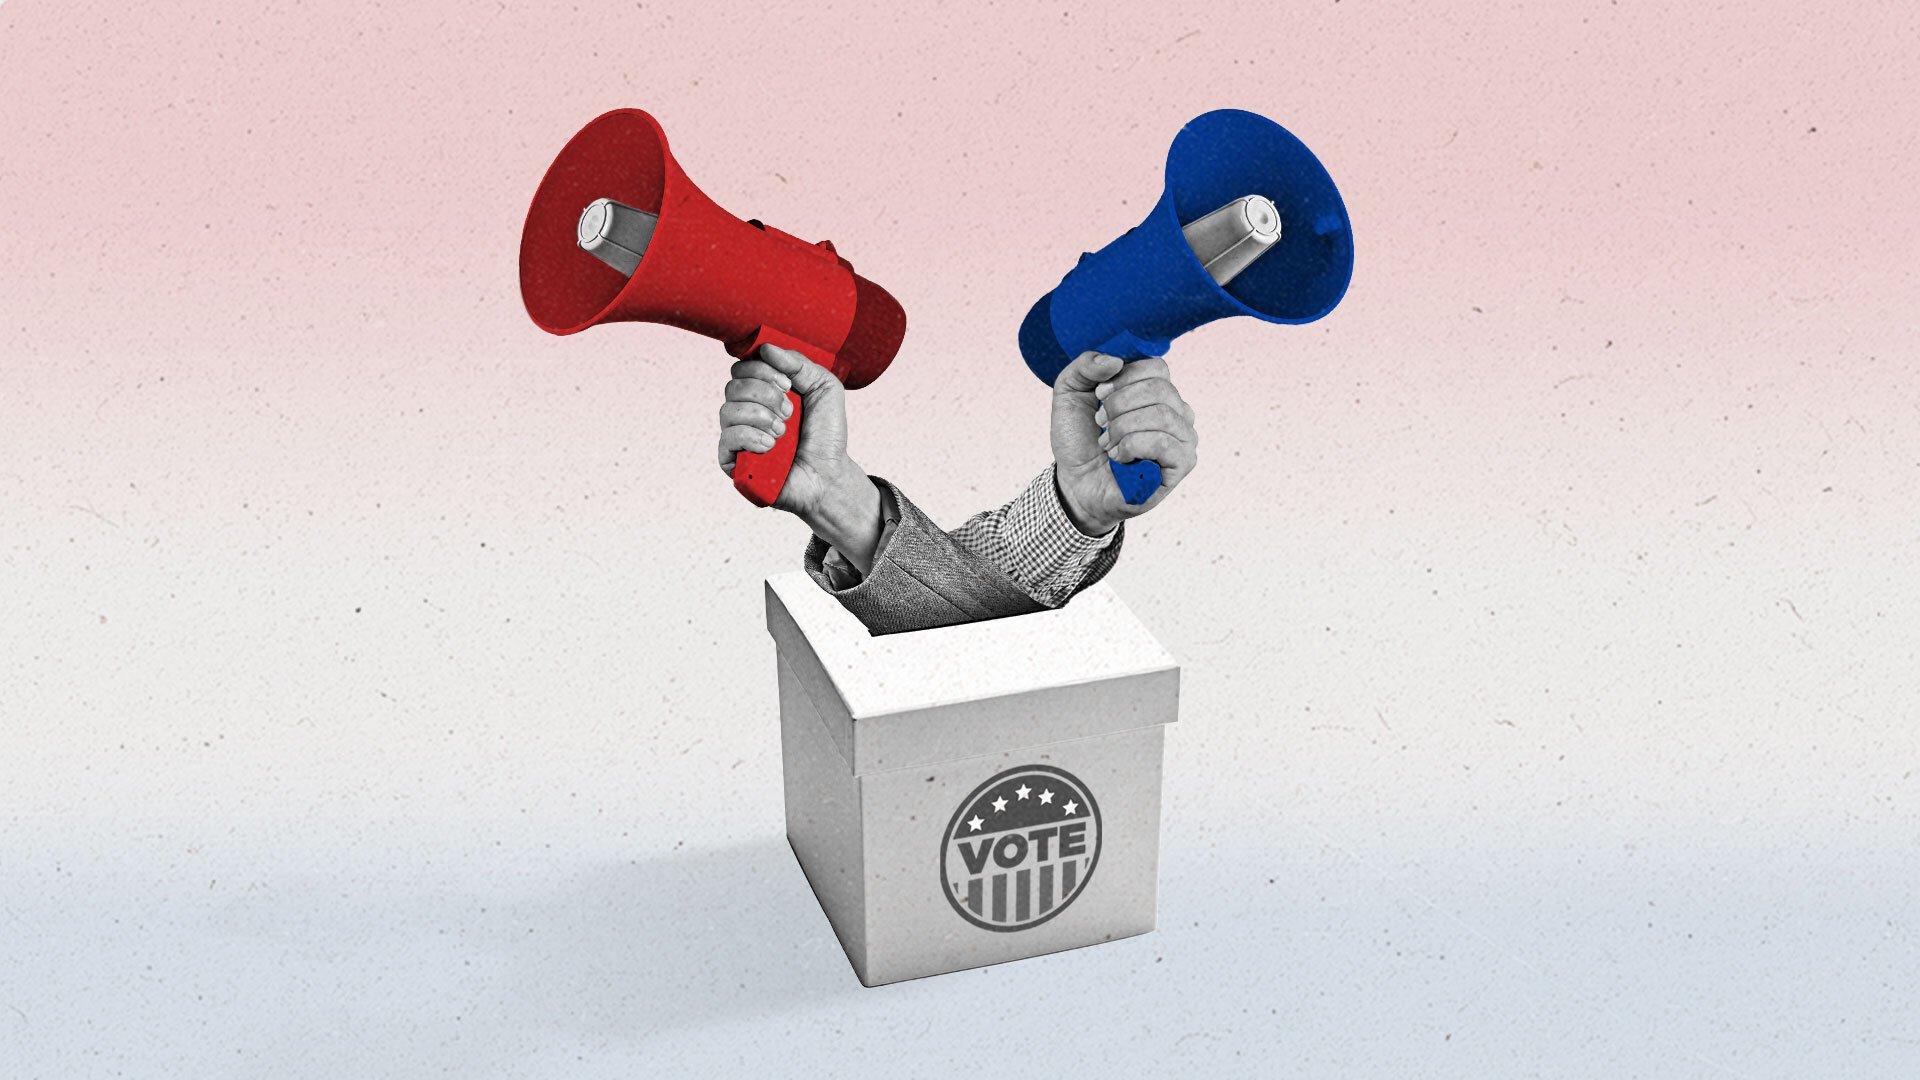 Two hands emerge from a voting ballot box holding a red speakerphone and a blue speakerphone on a red white and blue background.